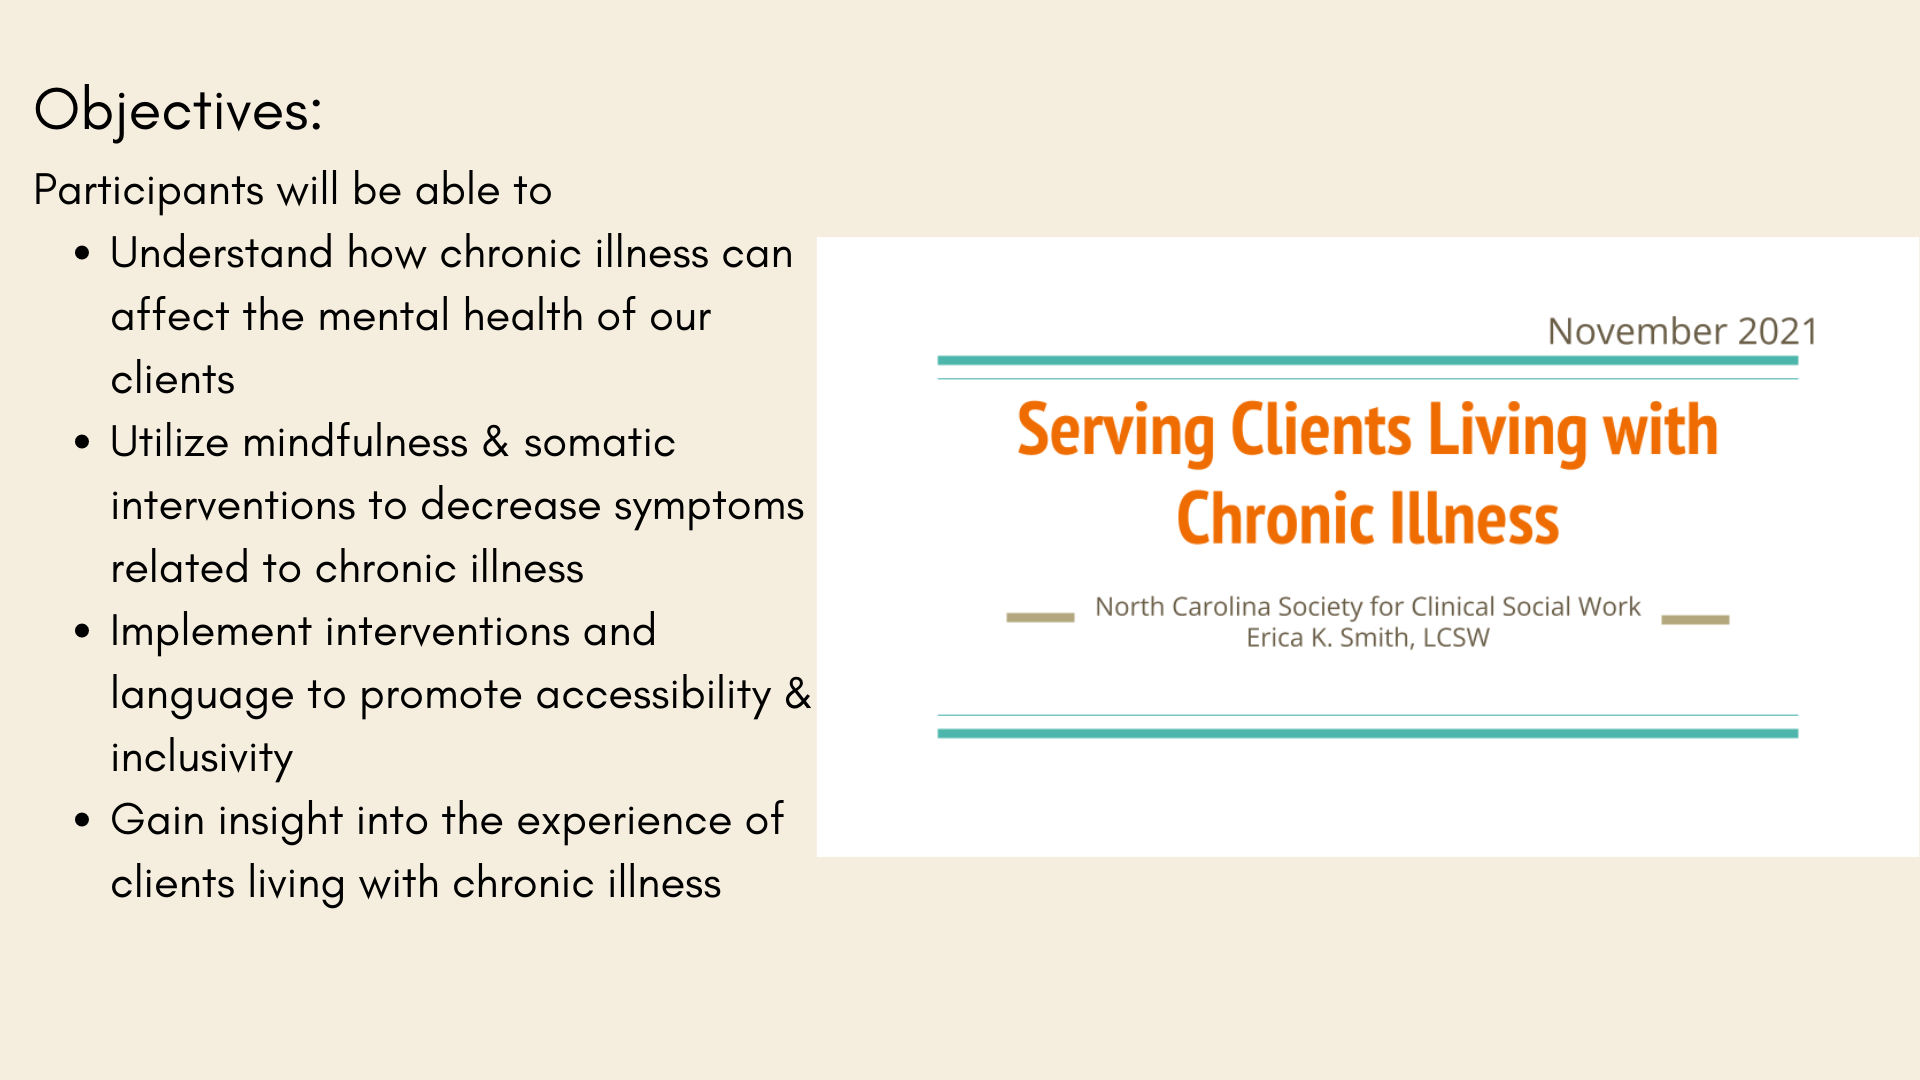 Serving Clients Living with Chronic Illness